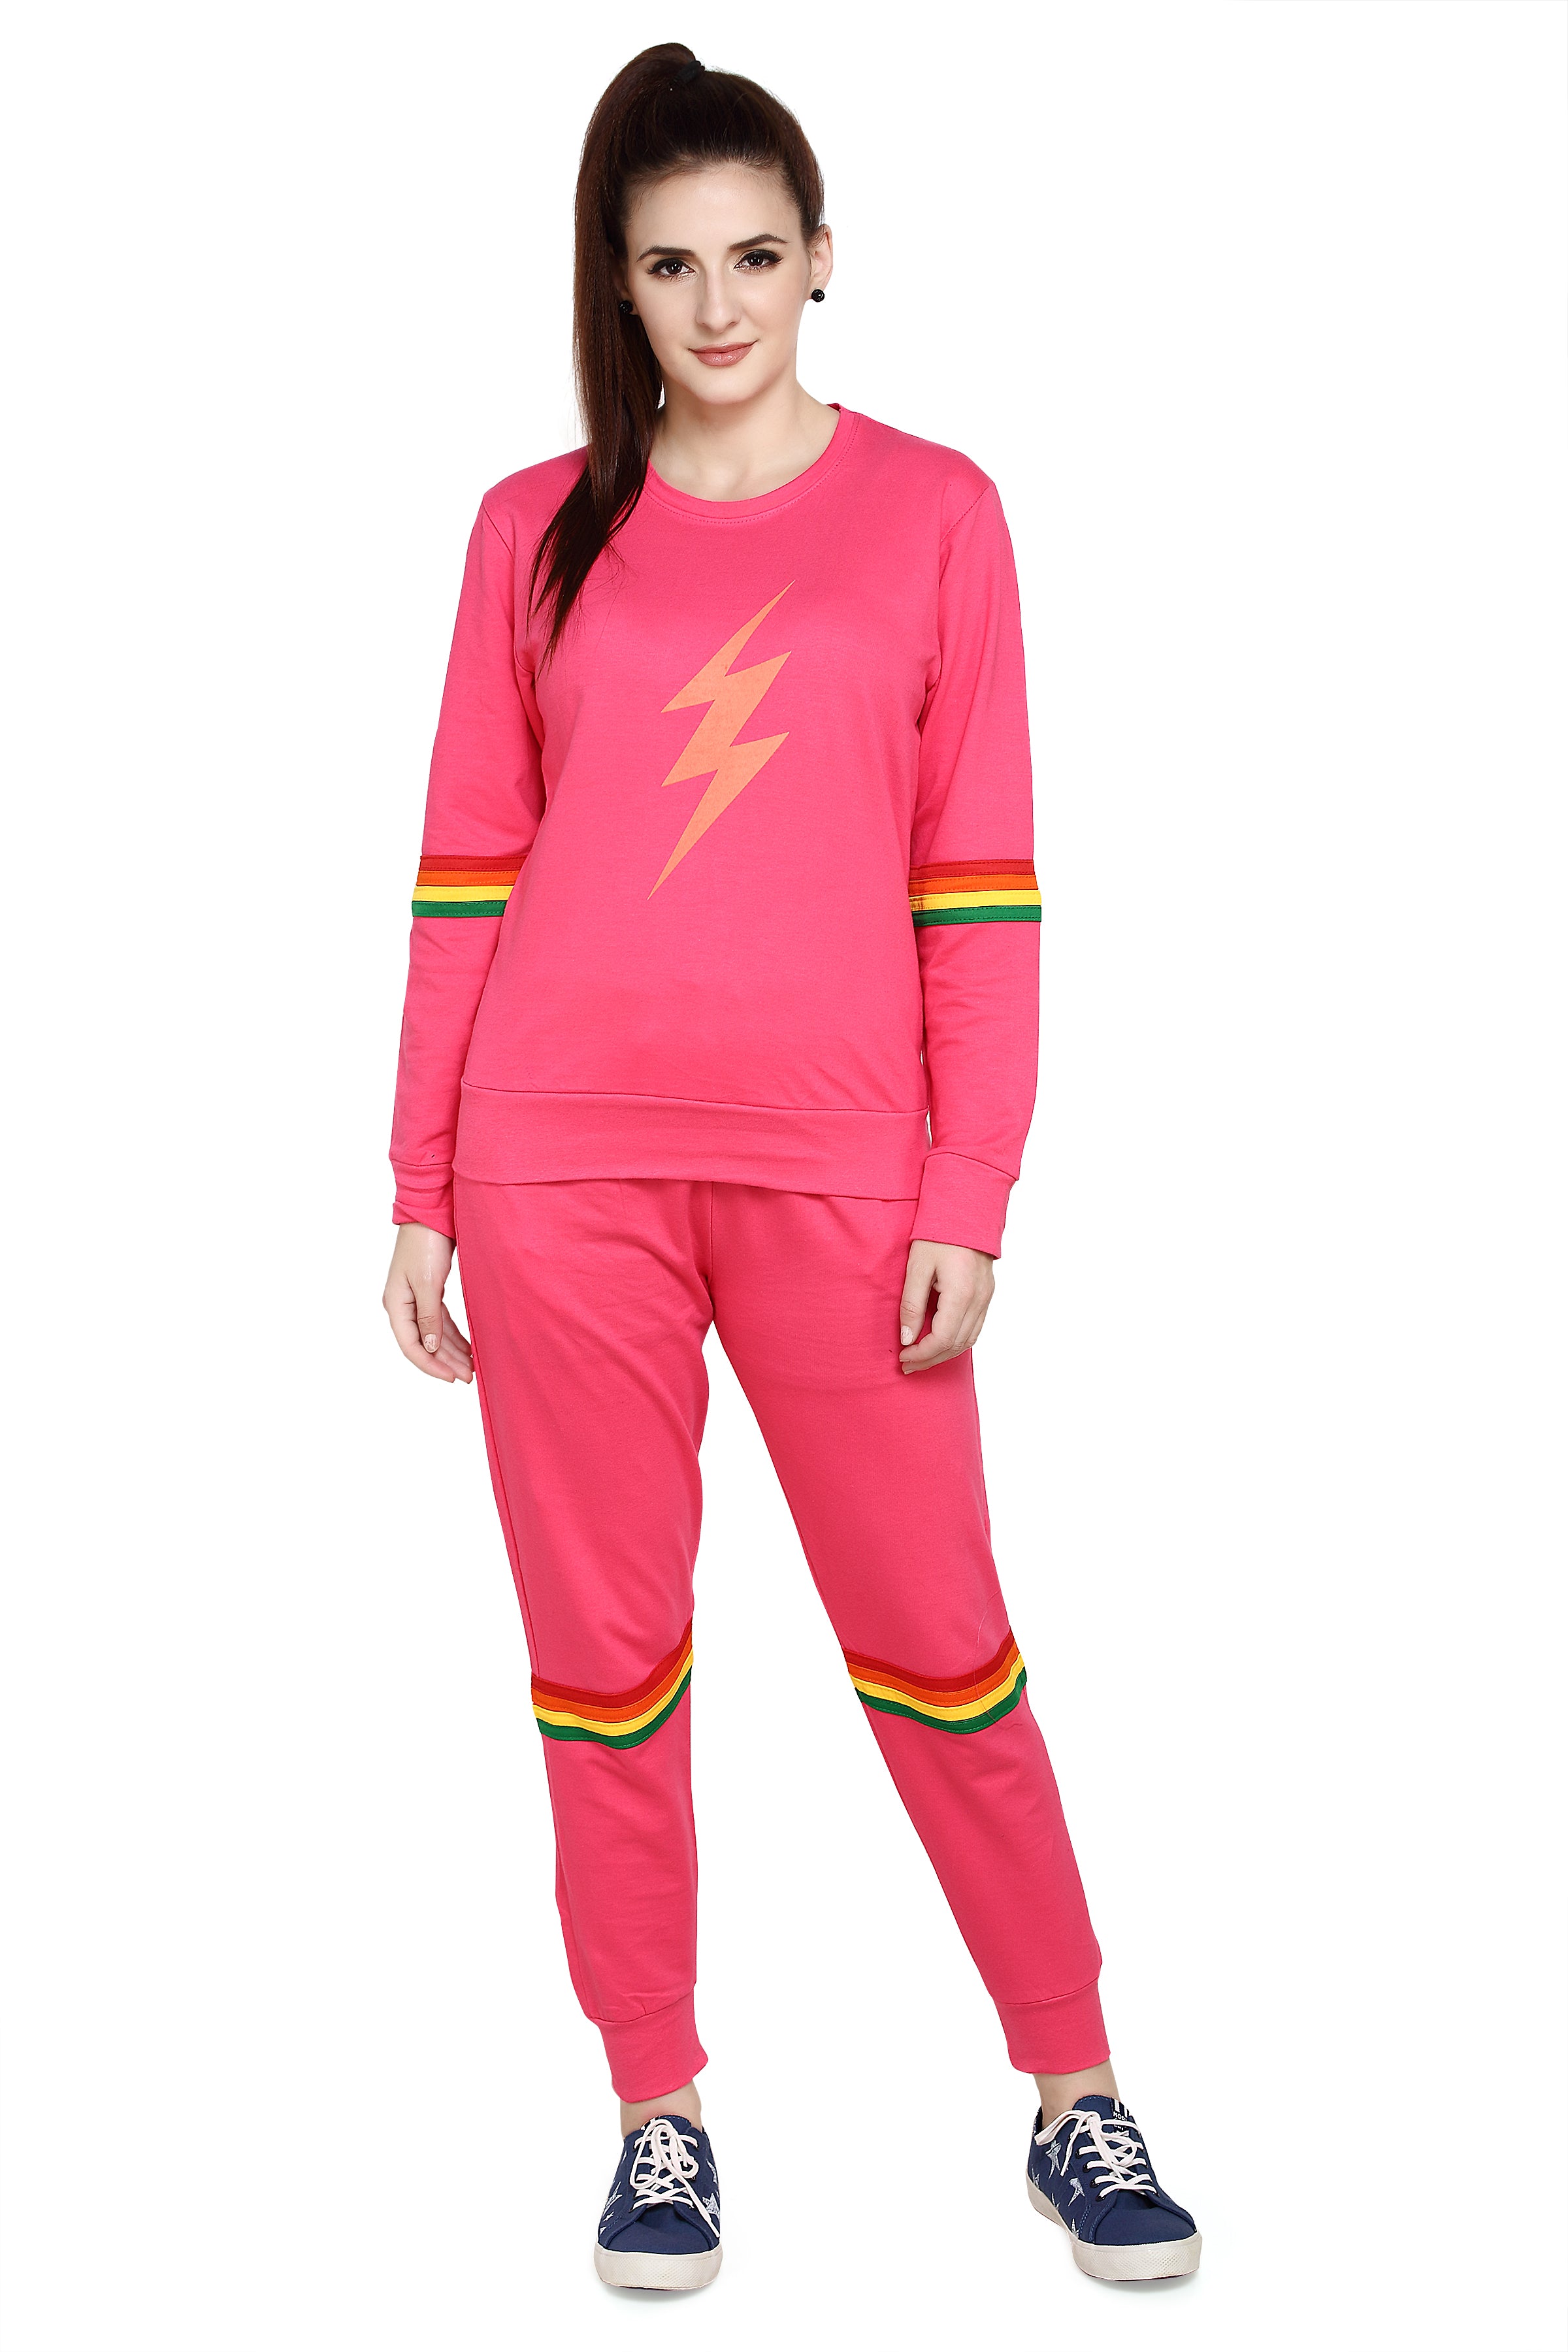 Evolove Women Track Suit or Tracksuit Top & Leggings Pants Outfit Set –  Evolove India